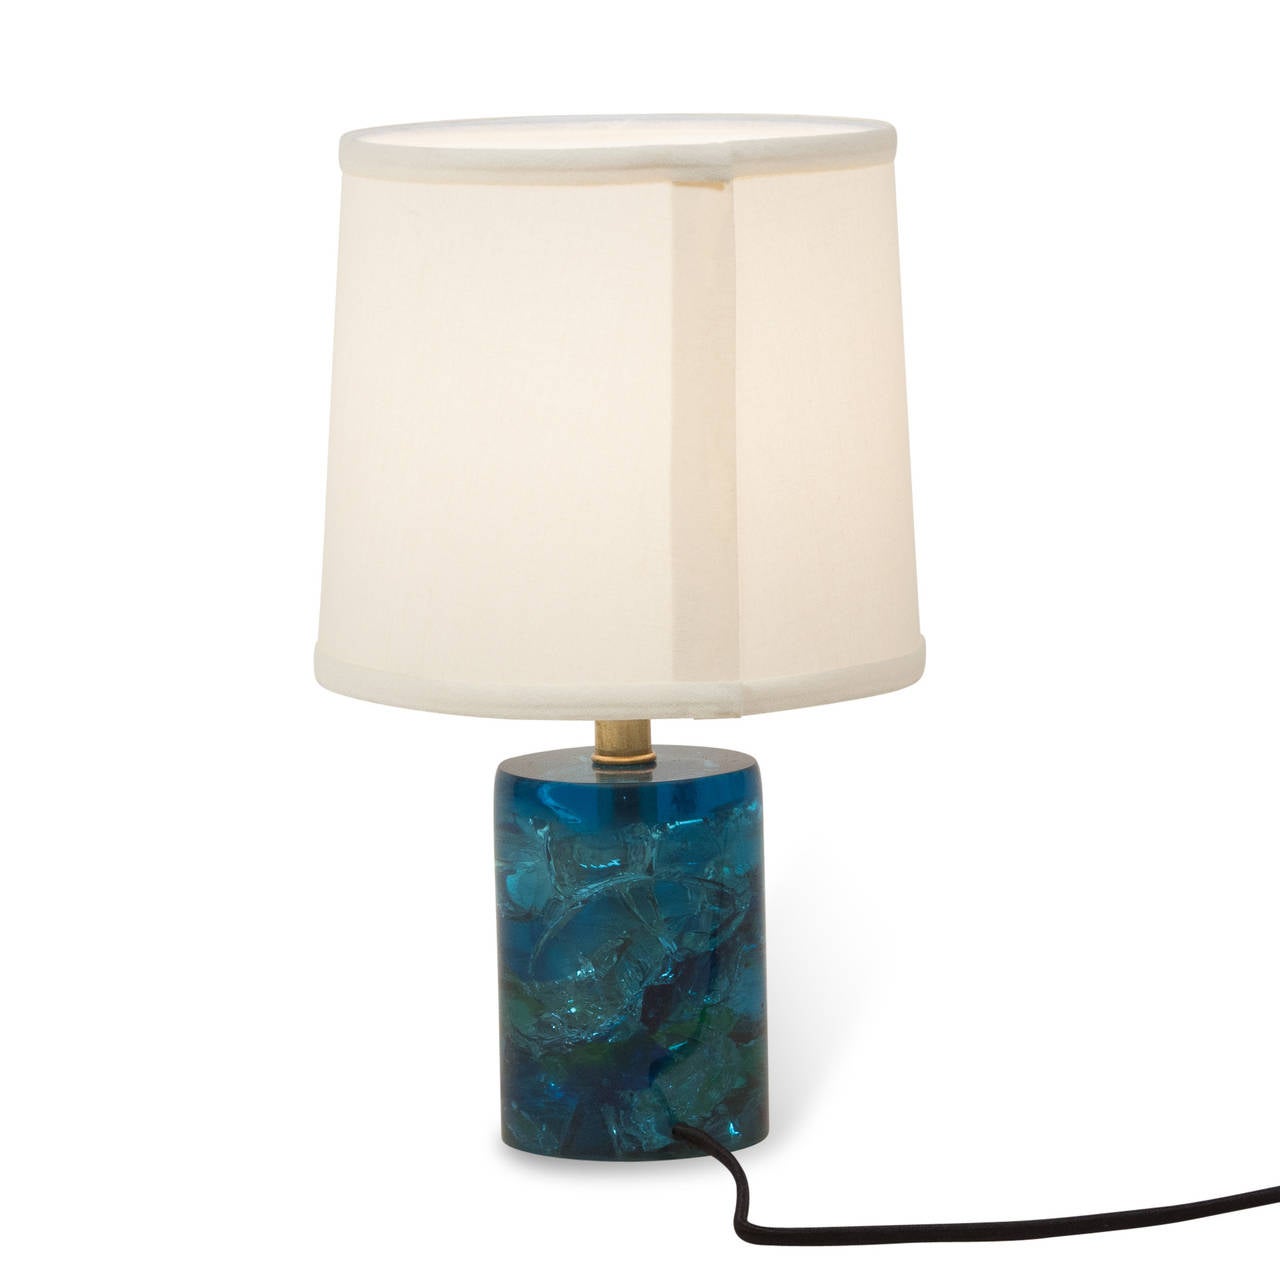 Blue cracked resin small table lamp, with bits of green, in custom silk shade, United Kingdom, late 1960s. Overall height 13 1/2 in, height of base 5 in, diameter of base 3 in. Shade measures top diameter 7 in, bottom diameter 8 in, height 7 in.